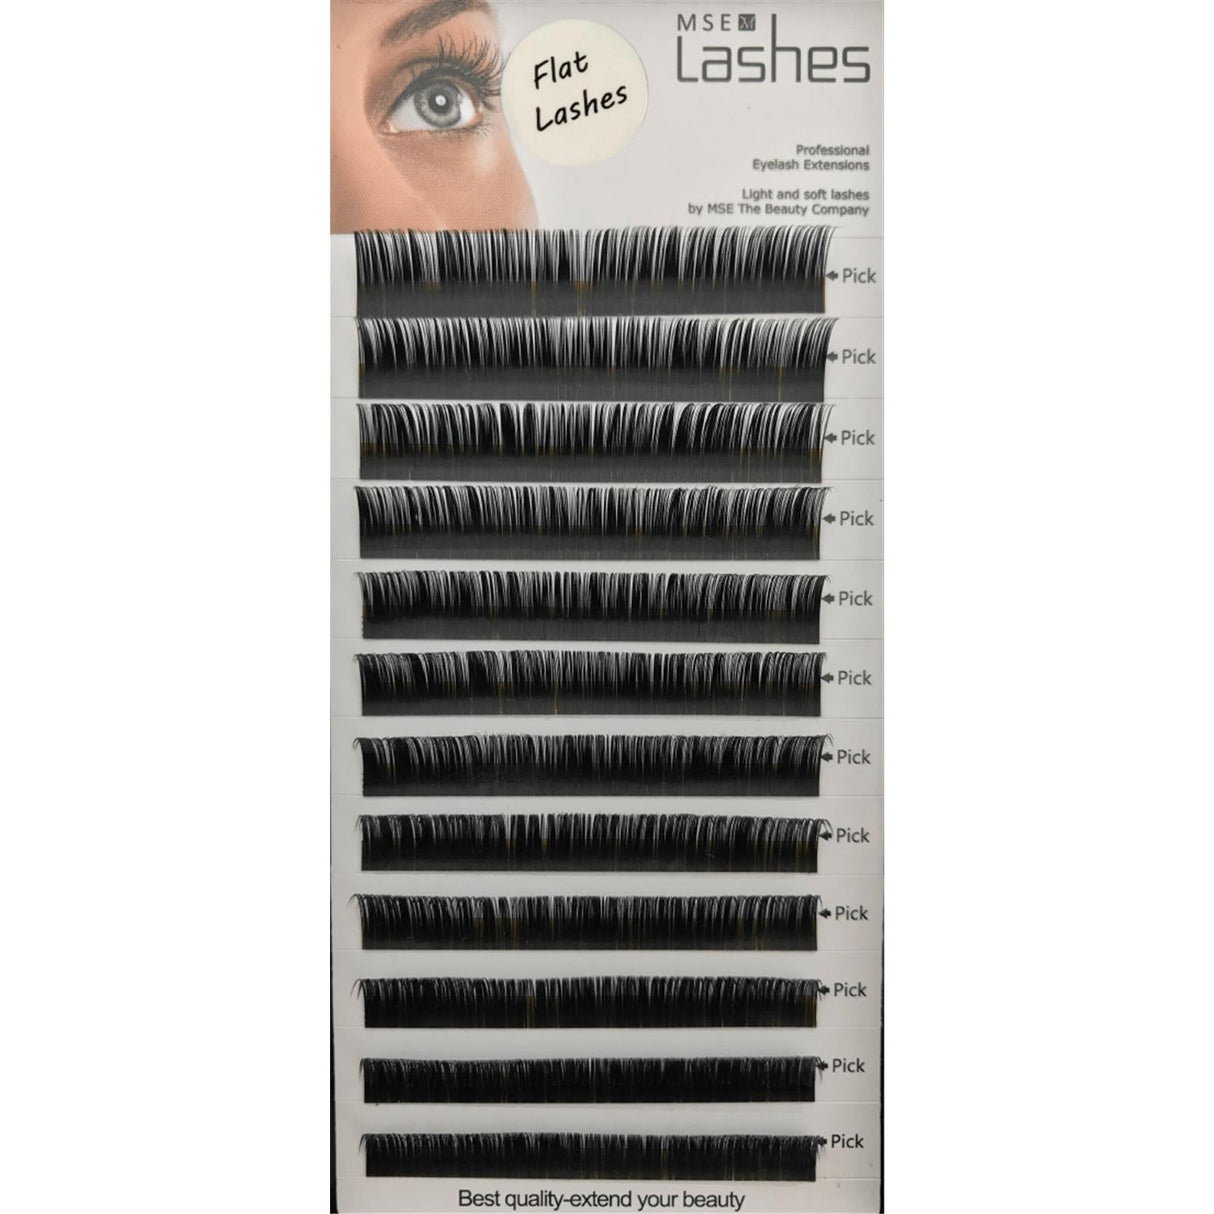 Seidenwimpern Flat Lashes Trays - D-Curl - 0,15 mm - 10 mm - MSE - The Beauty Company